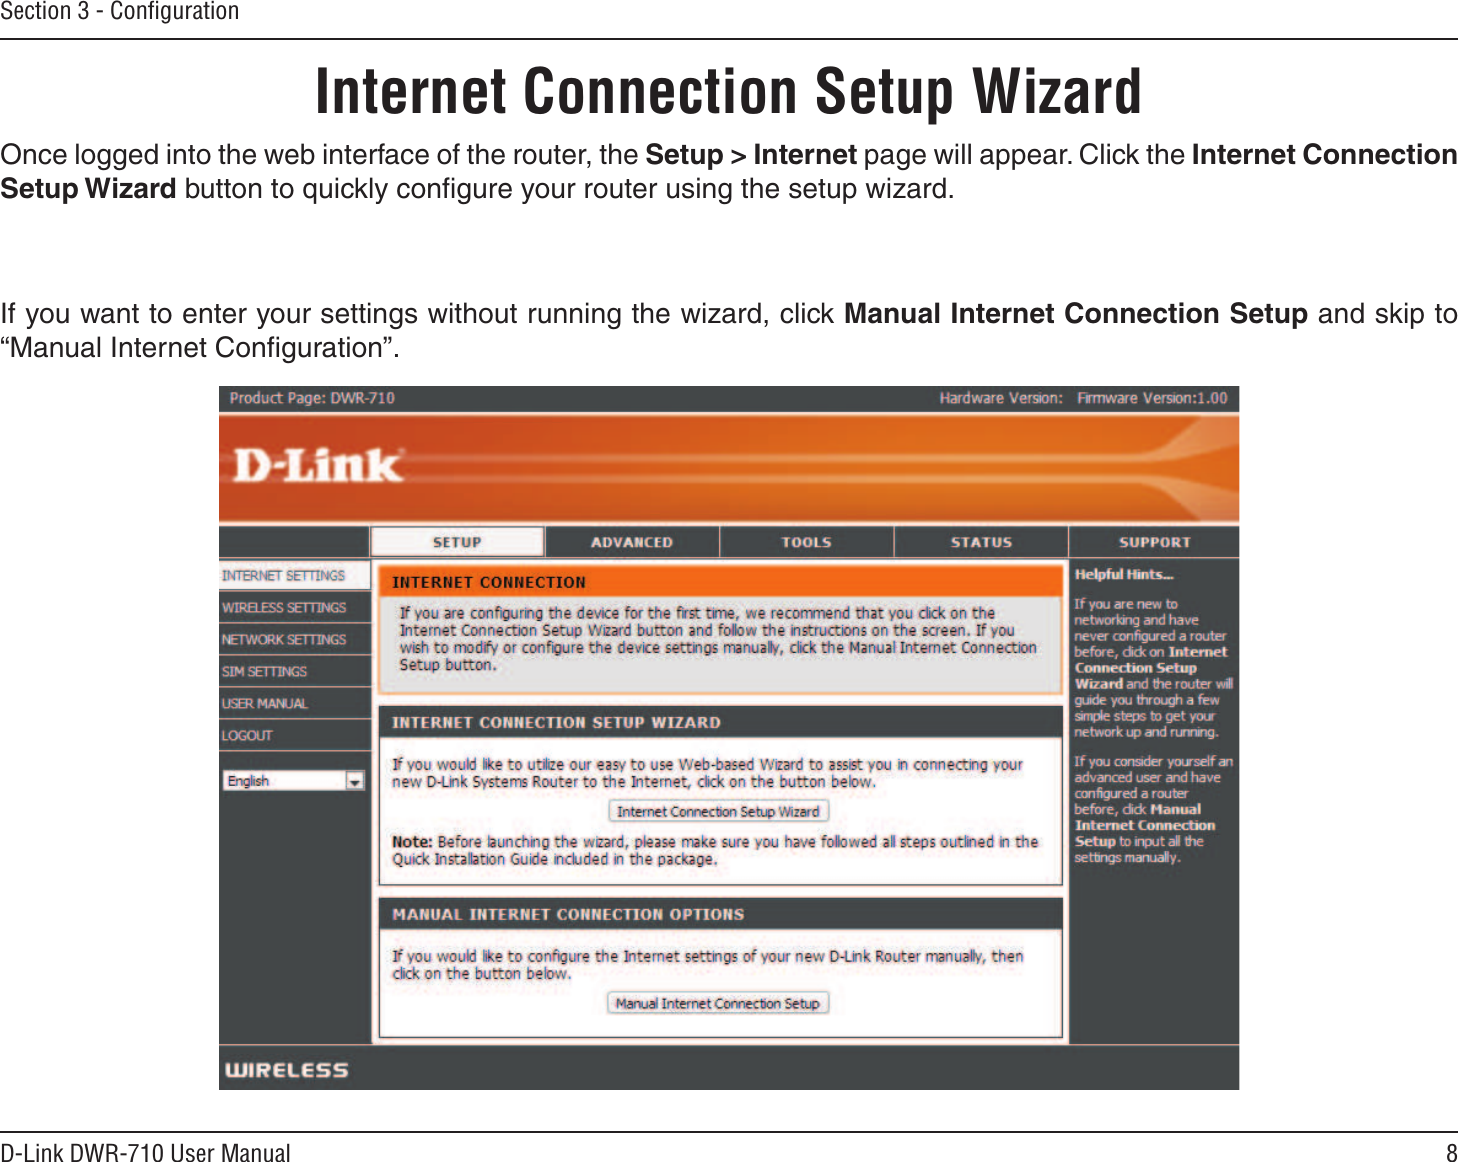 8D-Link DWR-710 User ManualSection 3 - ConﬁgurationInternet Connection Setup WizardOnce logged into the web interface of the router, the Setup &gt; Internet page will appear. Click the Internet Connection Setup Wizard button to quickly conﬁgure your router using the setup wizard.If you want to enter your settings without running the wizard, click Manual Internet Connection Setup and skip to “Manual Internet Conﬁguration”.